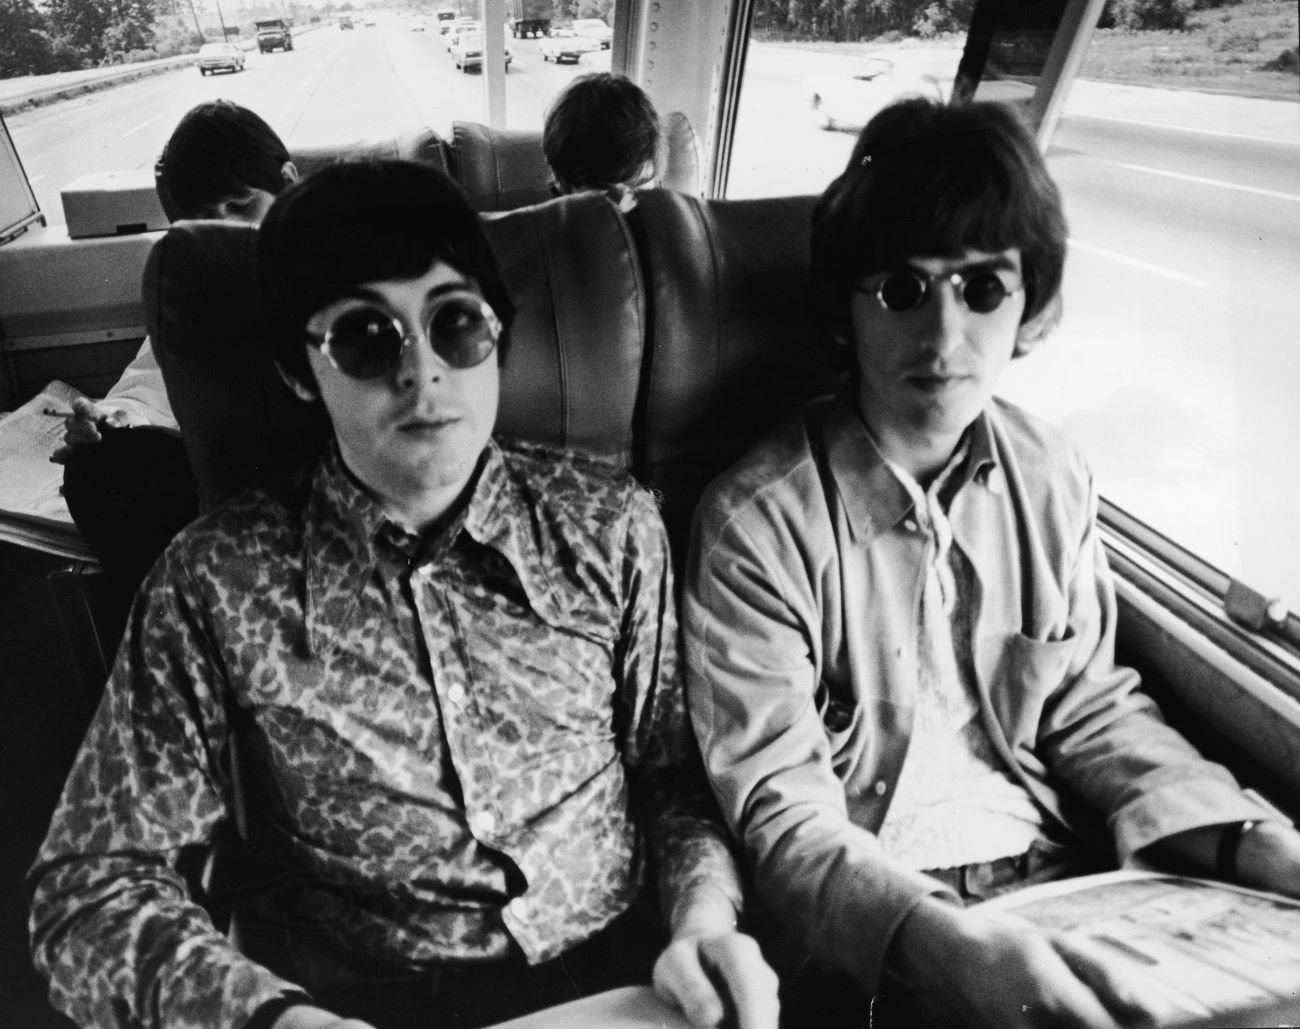 A black and white picture of Paul McCartney and George Harrison sitting on a bus together.